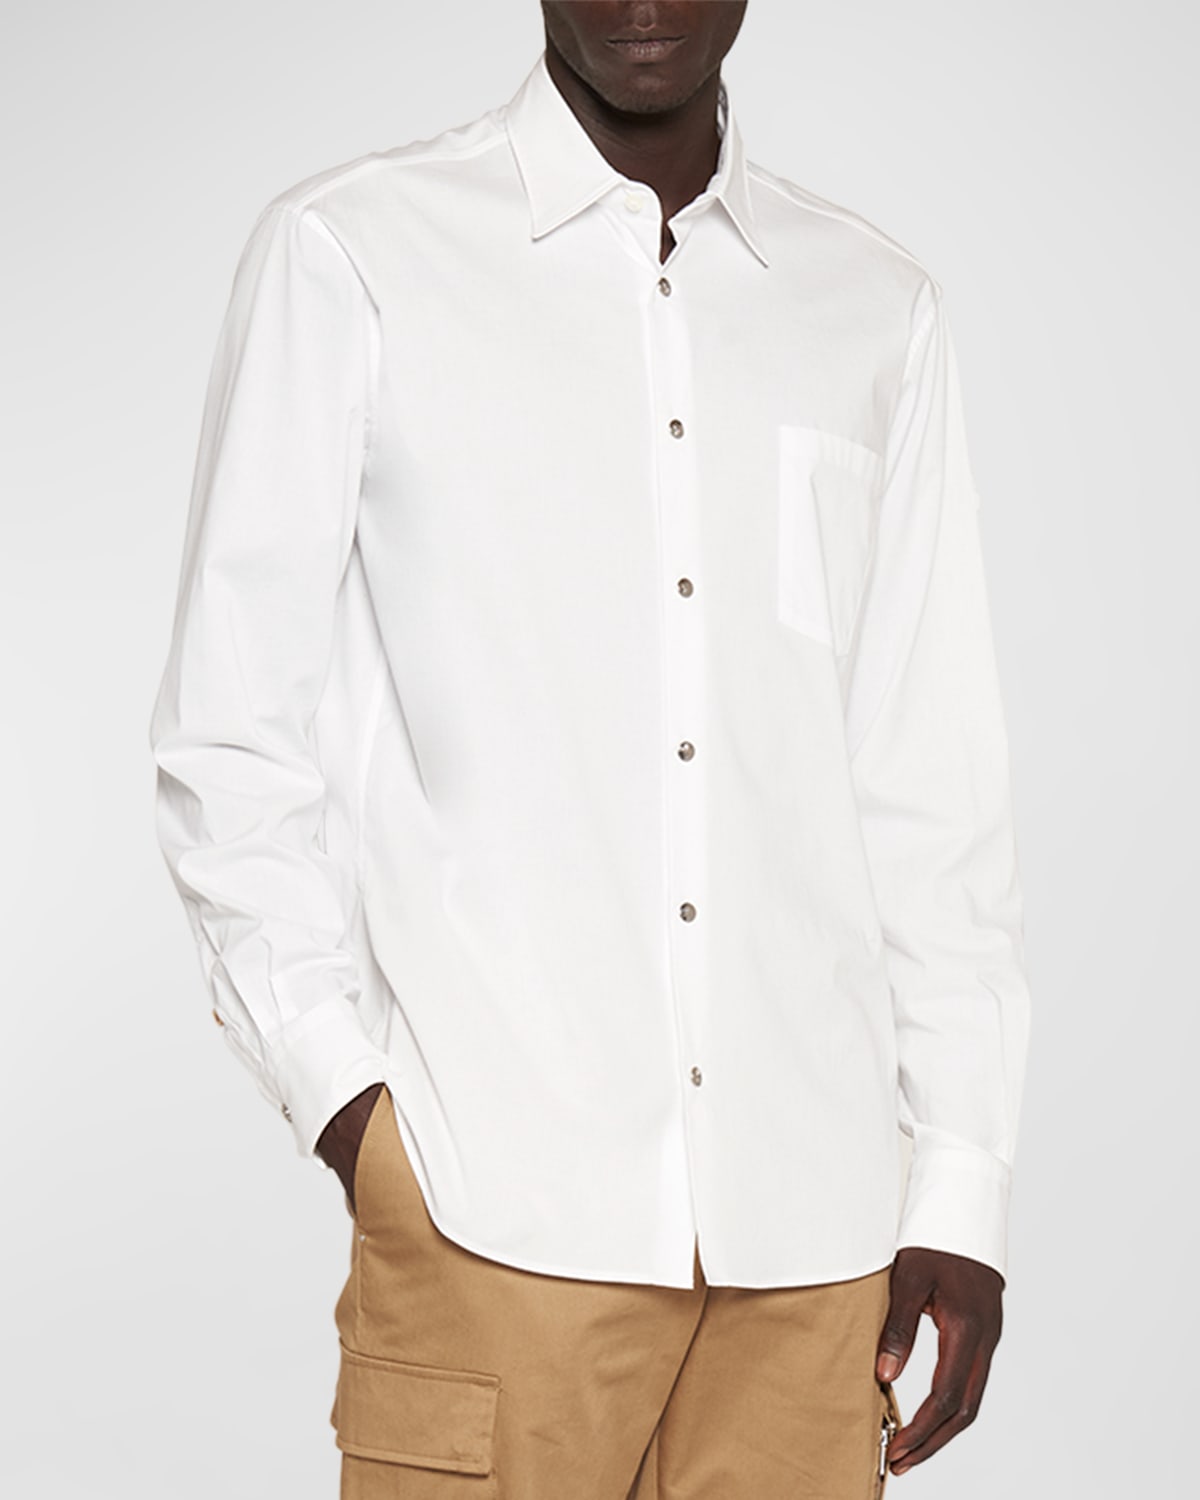 Moncler Men's Poplin Sport Shirt With Metal Buttons In White